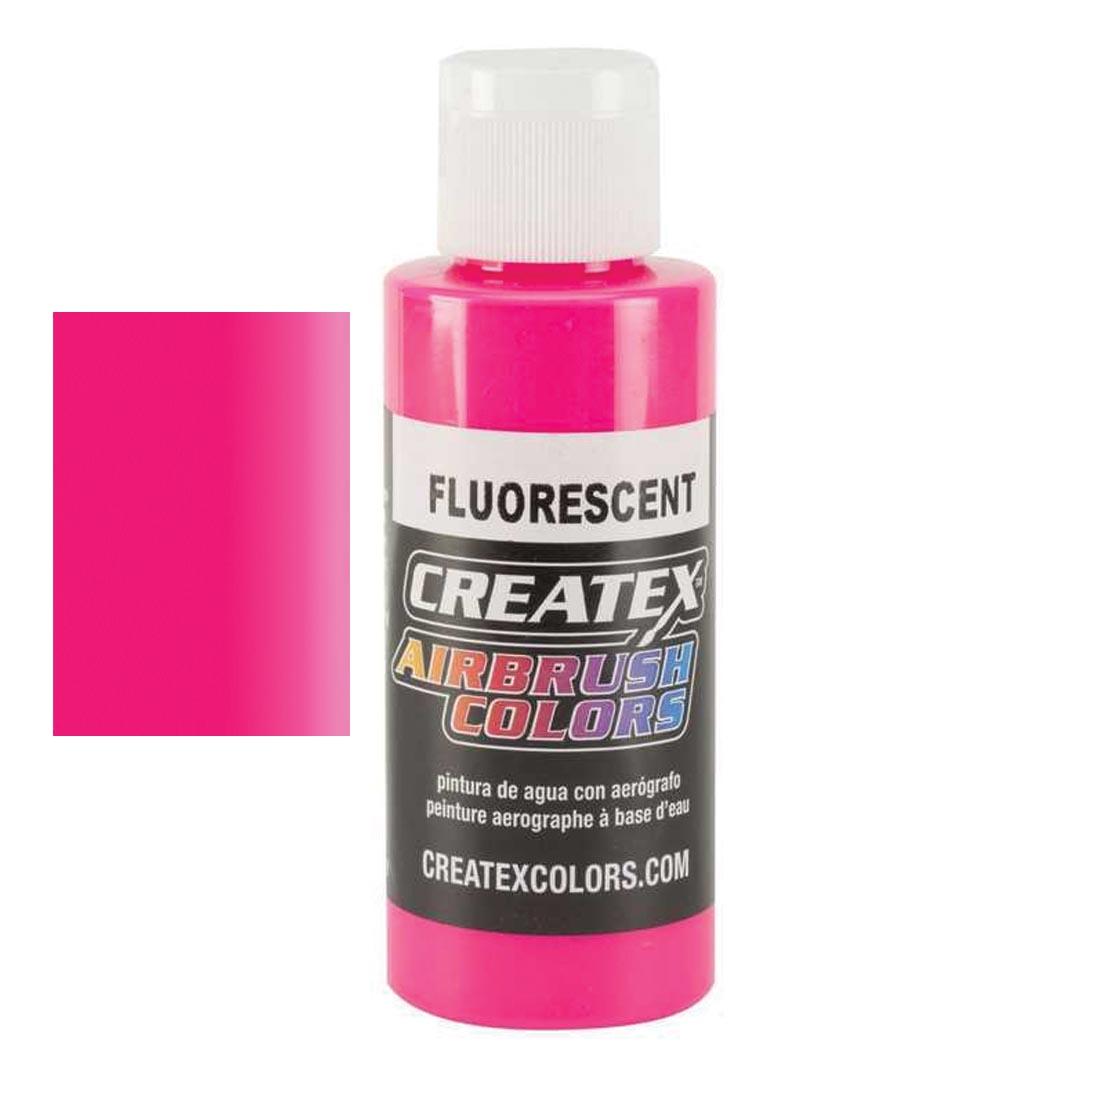 Bottle of Createx Airbrush Color Beside Fluorescent Hot Pink Color Swatch